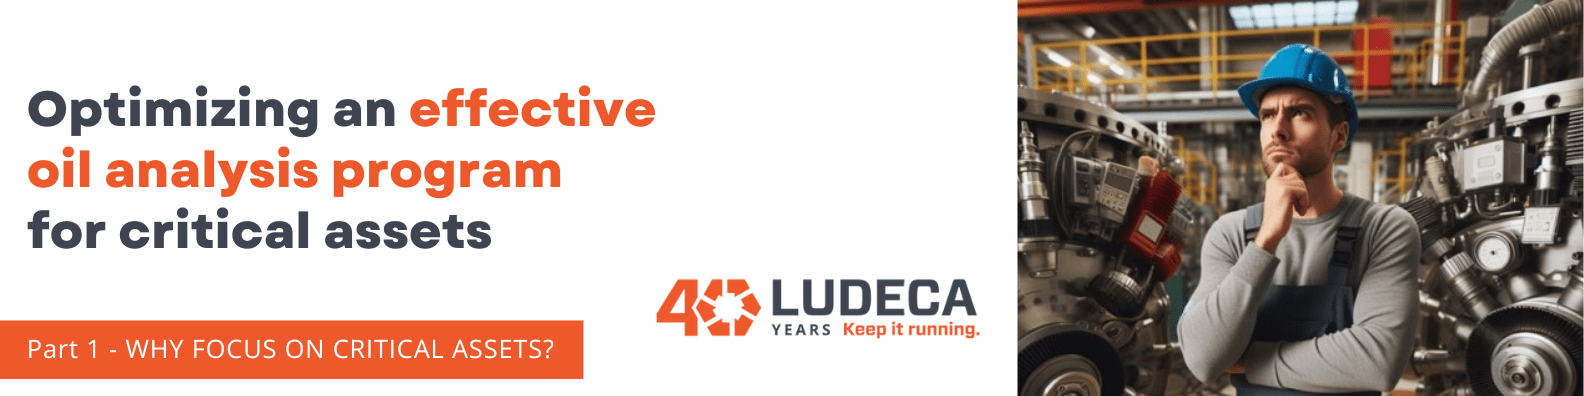 Ludeca-part1-banner